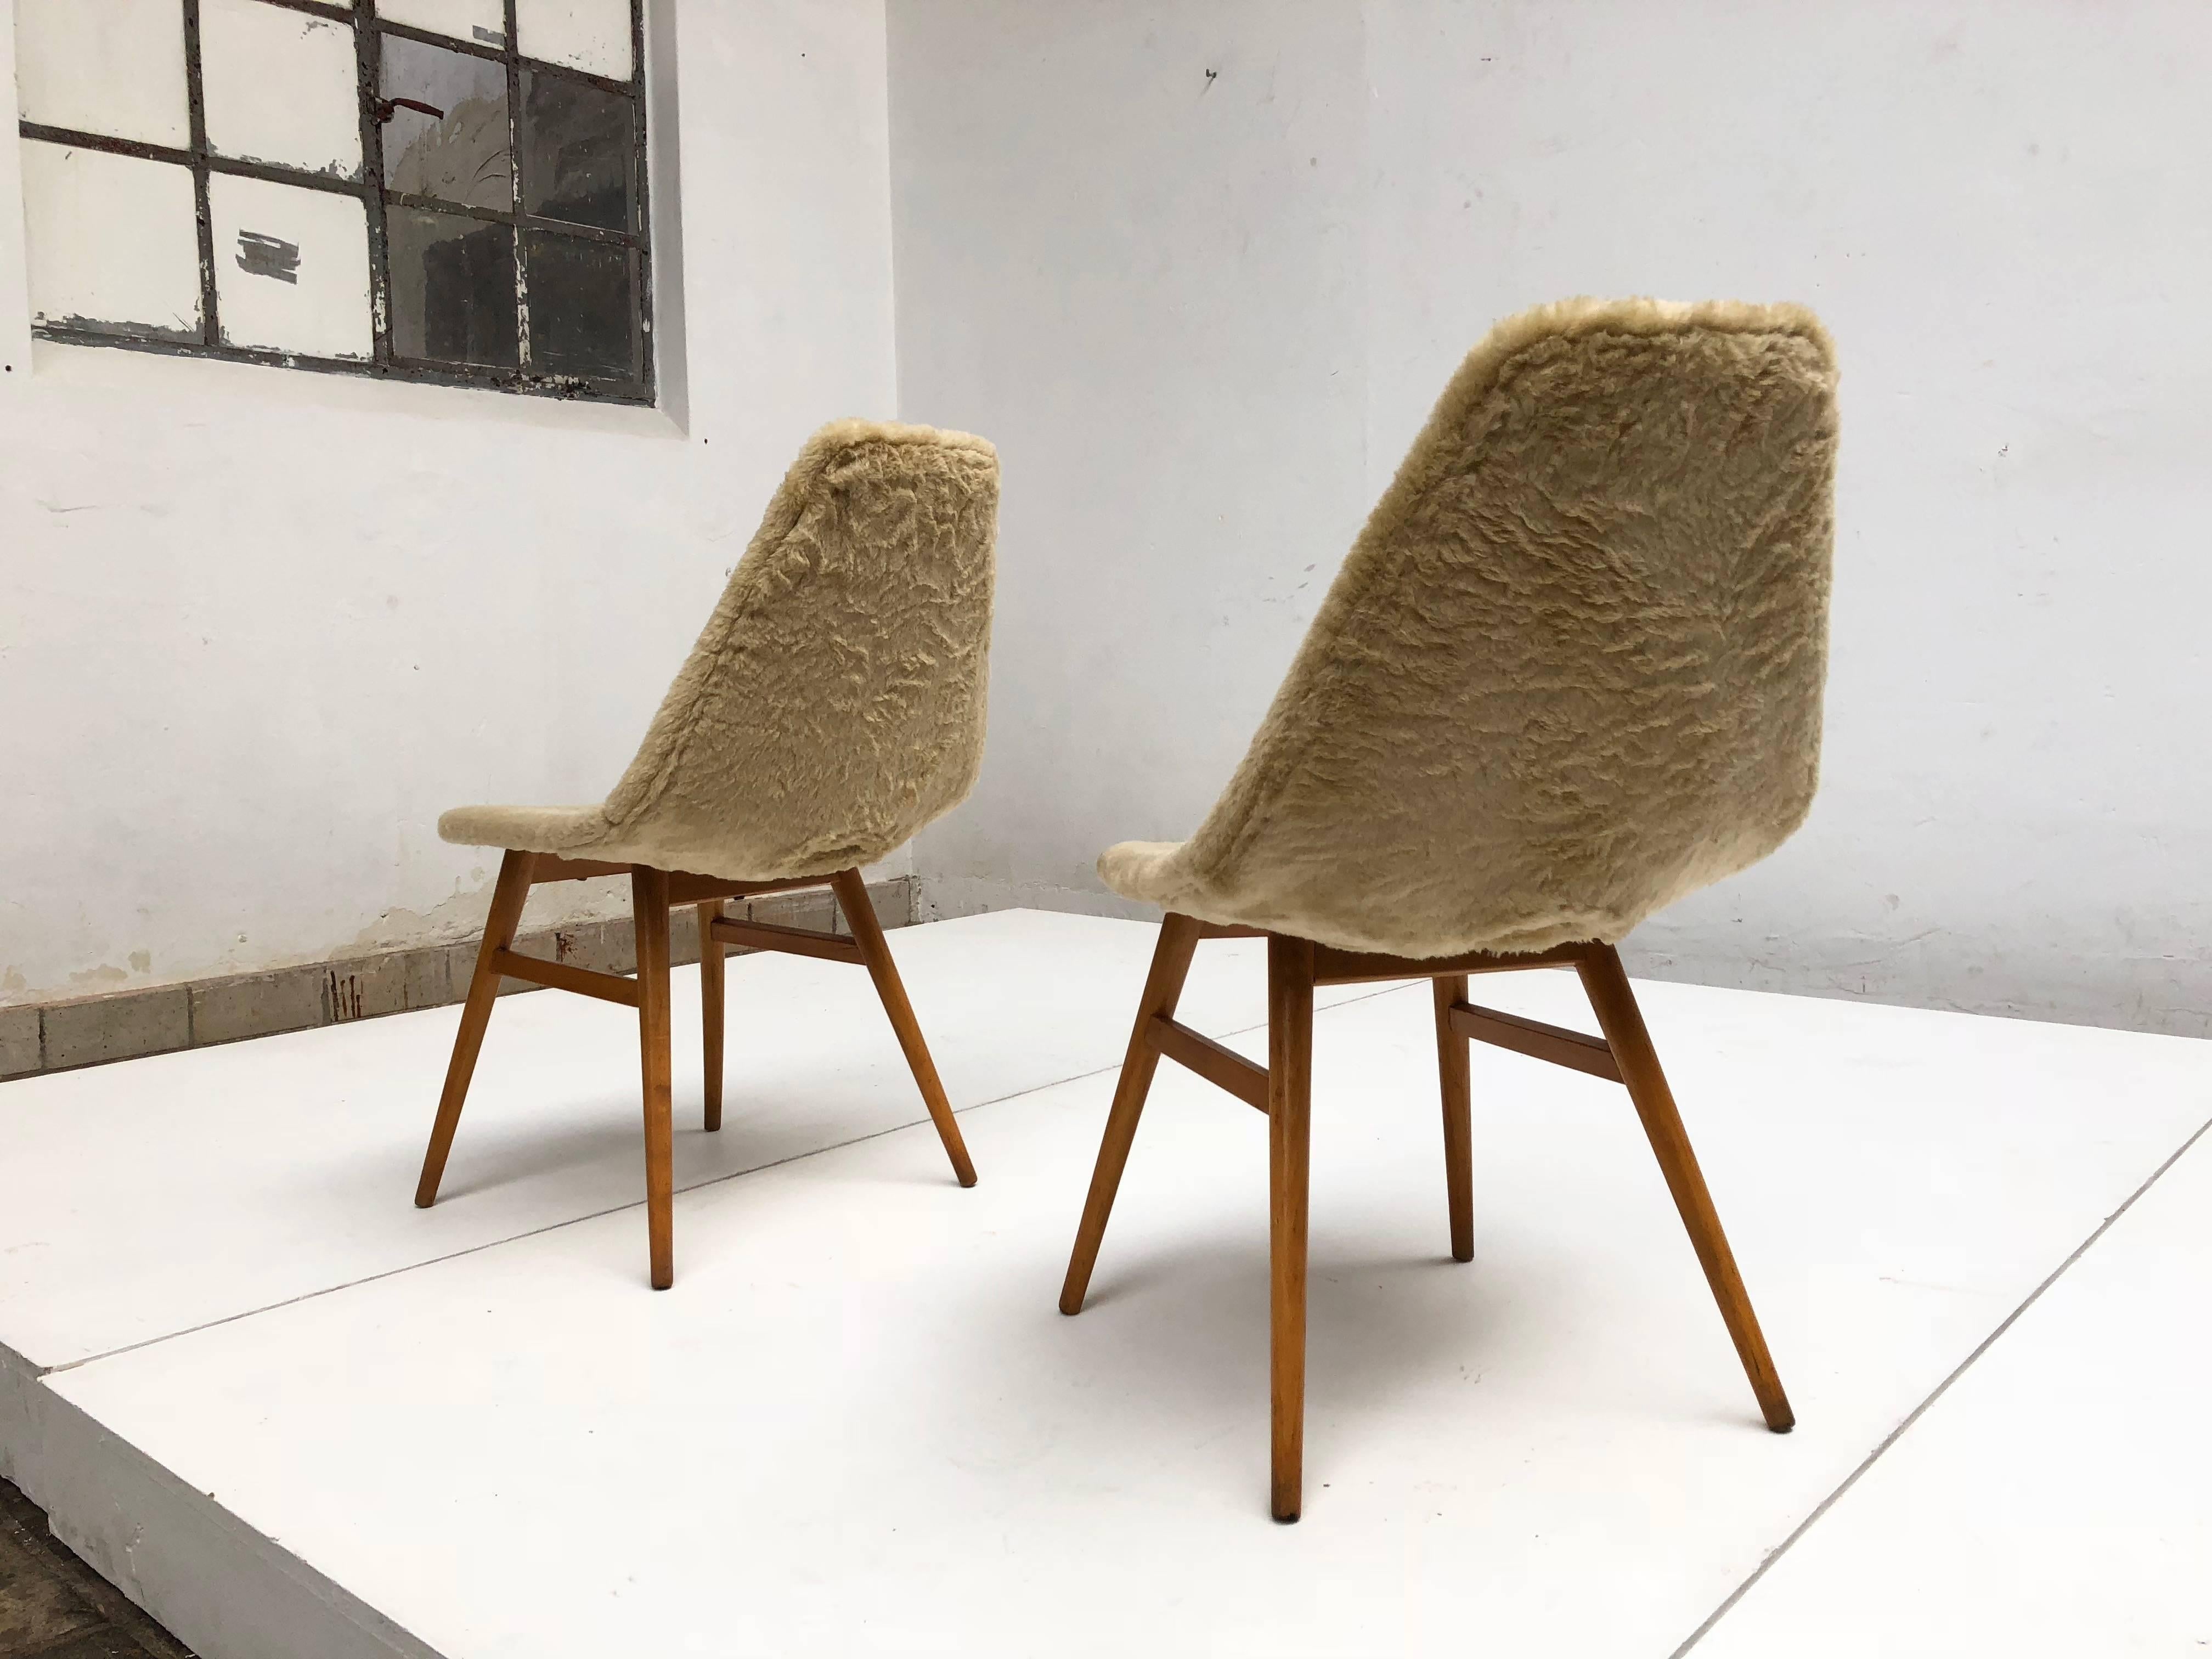 Pair of Side Chairs by Judit Burian & Erika Szek Hungary, circa 1959 For Sale 1